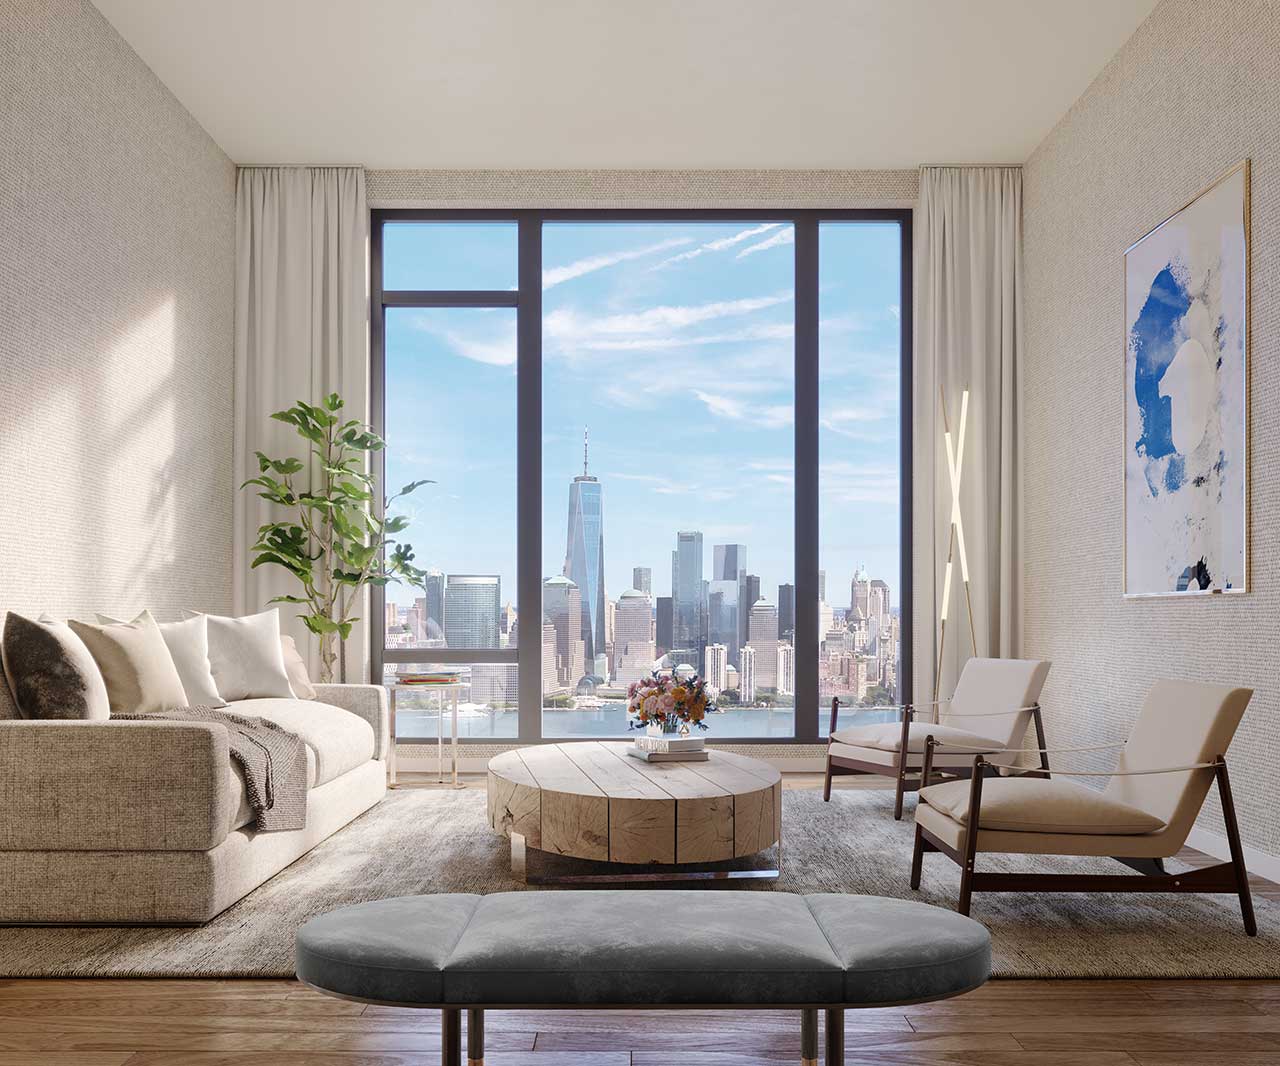 99 Hudson Condos For Sale Jersey City 9